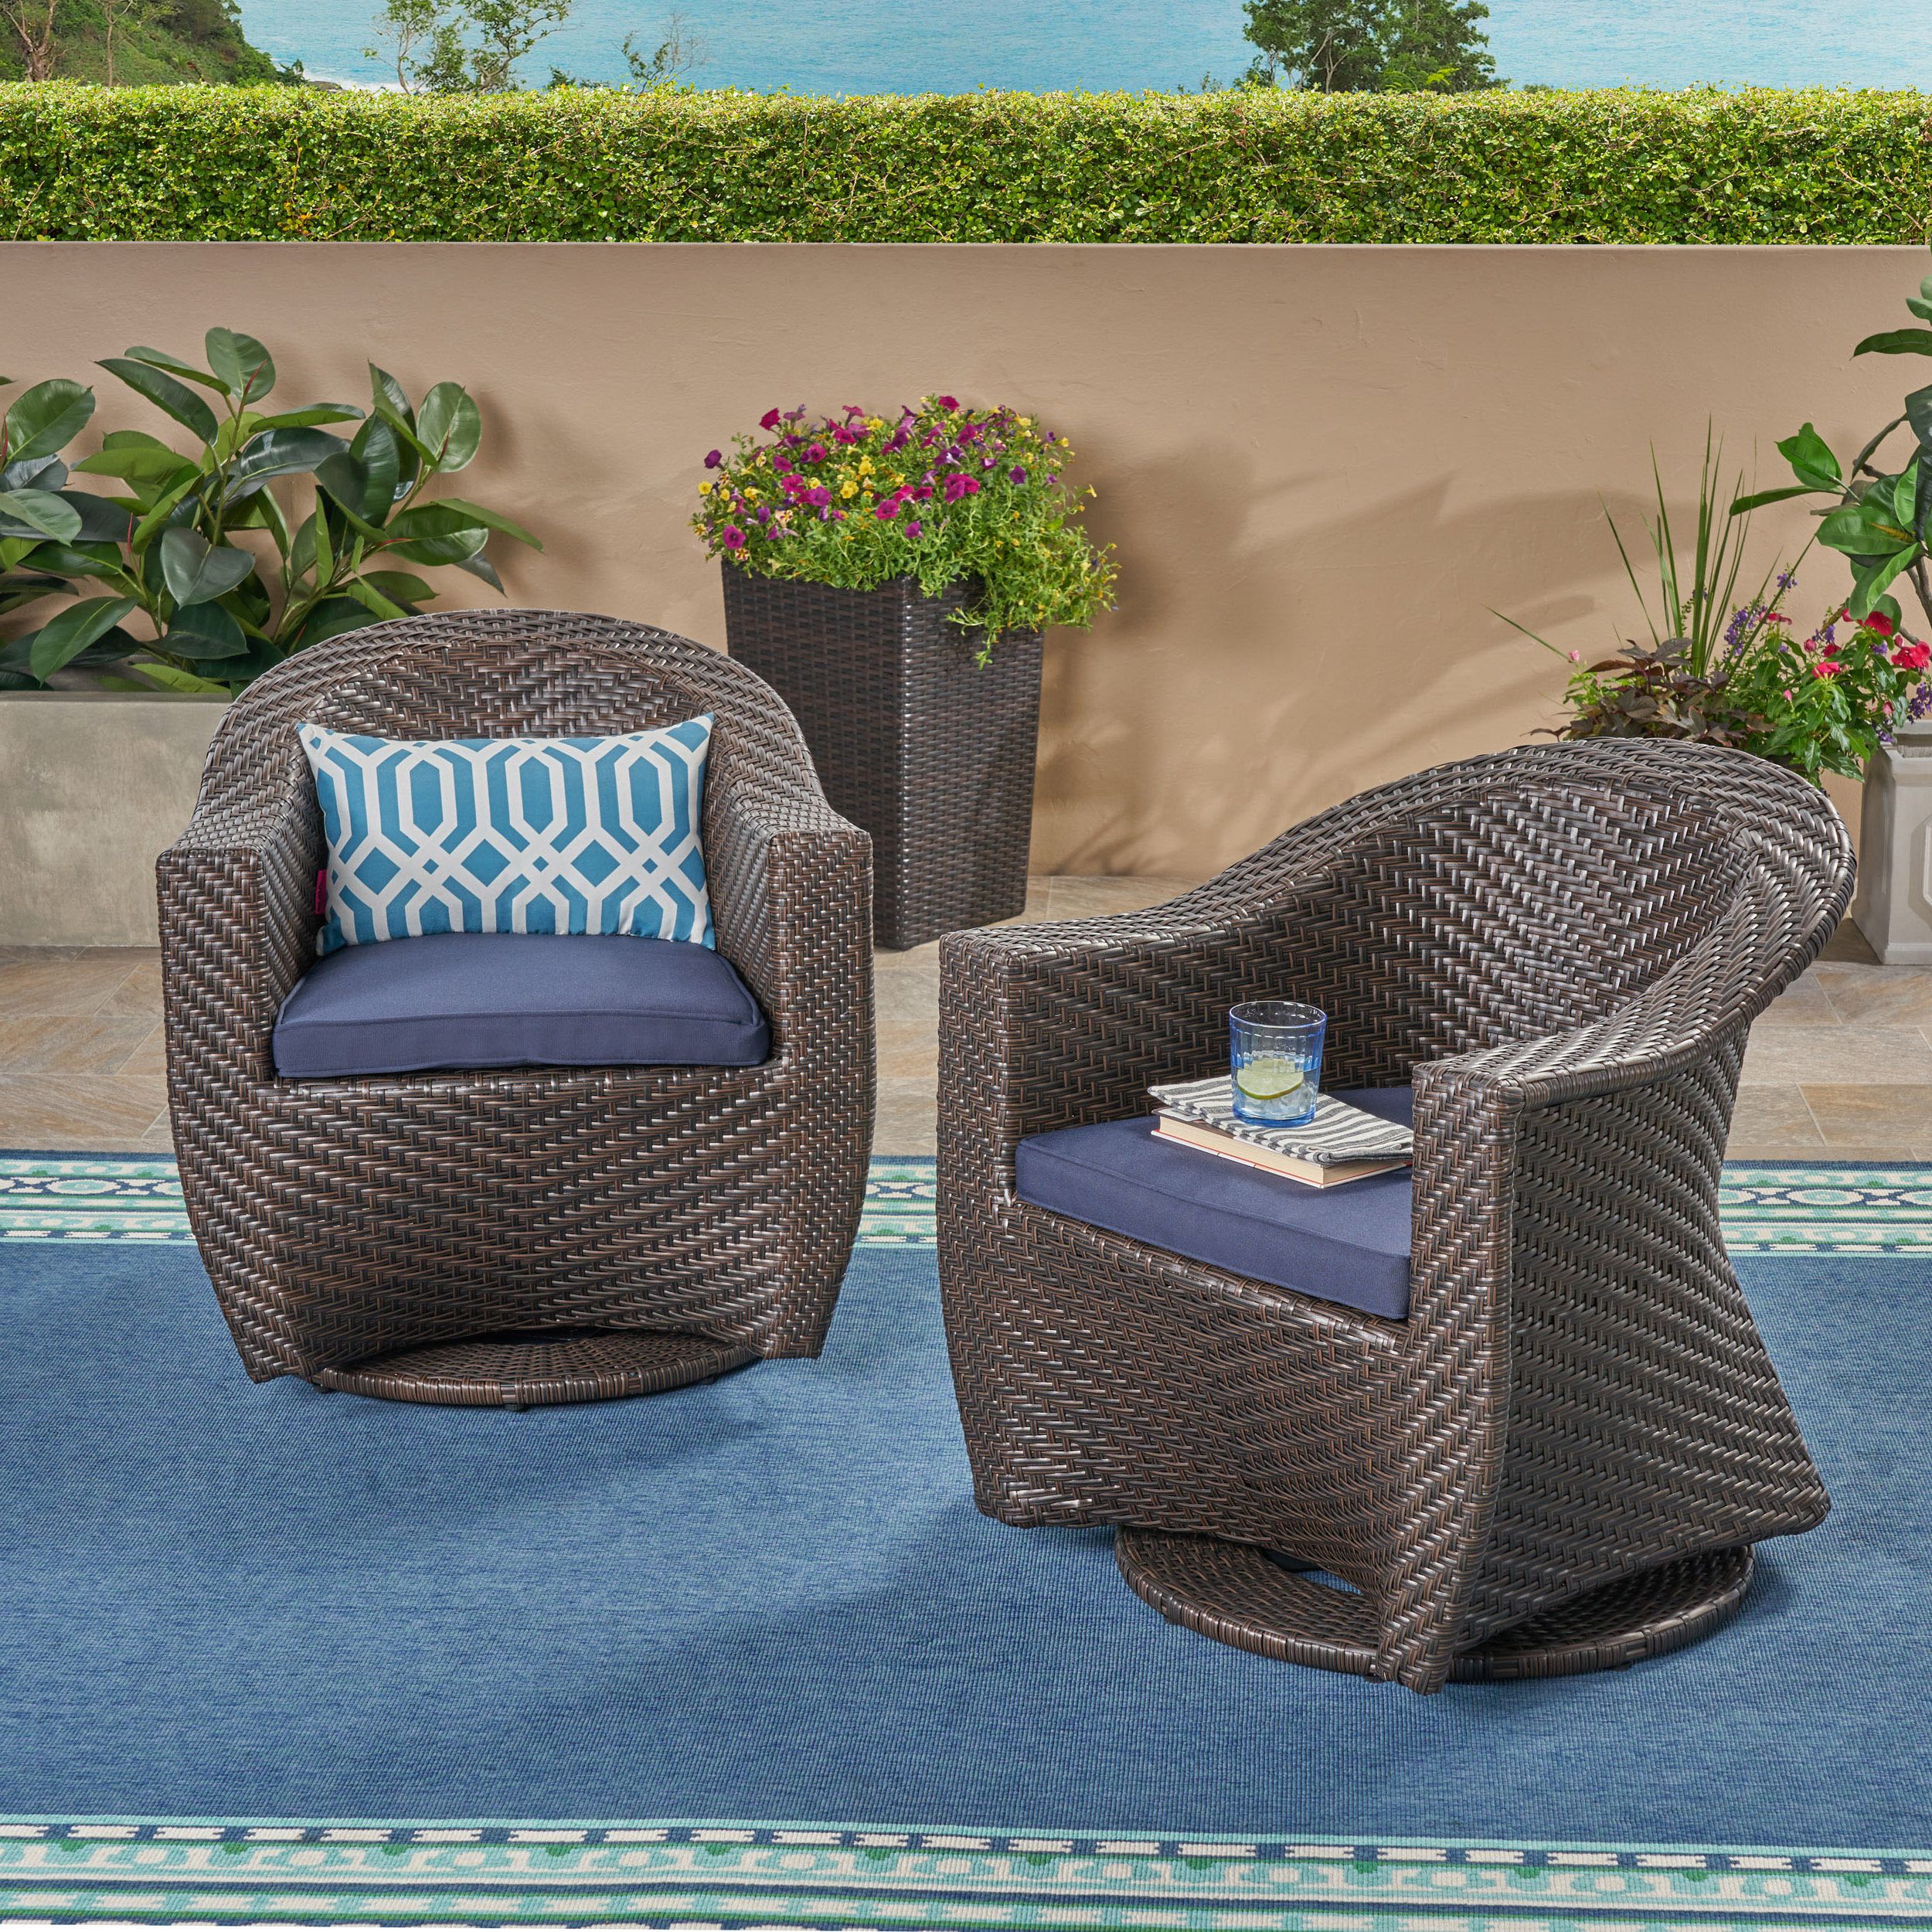 Blue And Brown Wicker Outdoor Patio Sets Within Most Popular Mackenzie Outdoor Swivel Wicker Chairs With Cushions, Set Of 2, Multi (View 10 of 15)